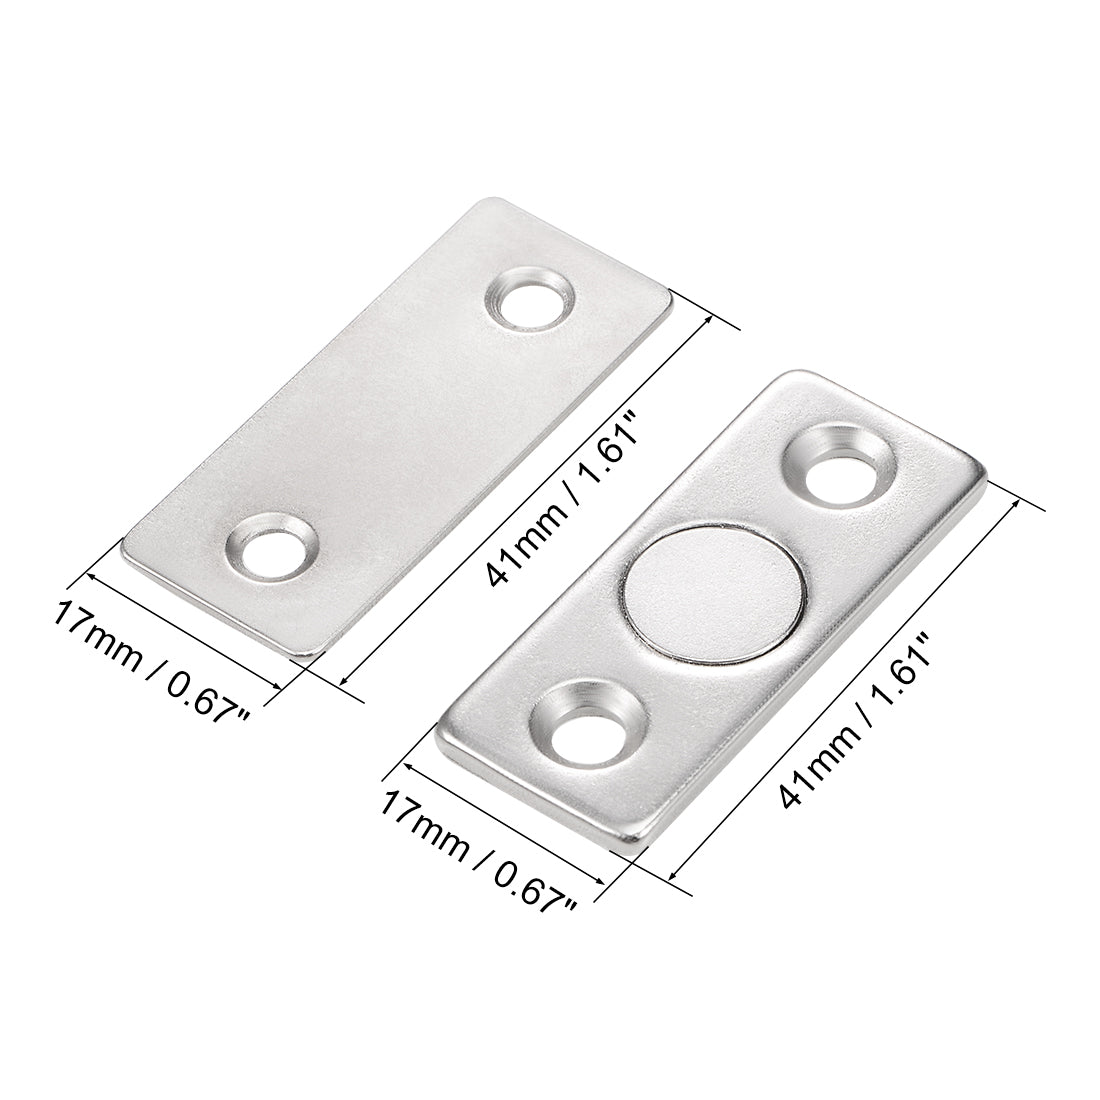 uxcell Uxcell Thin Cabinet Door Magnetic Catch Stainless Steel Magnetic Latch Hardware 2pcs